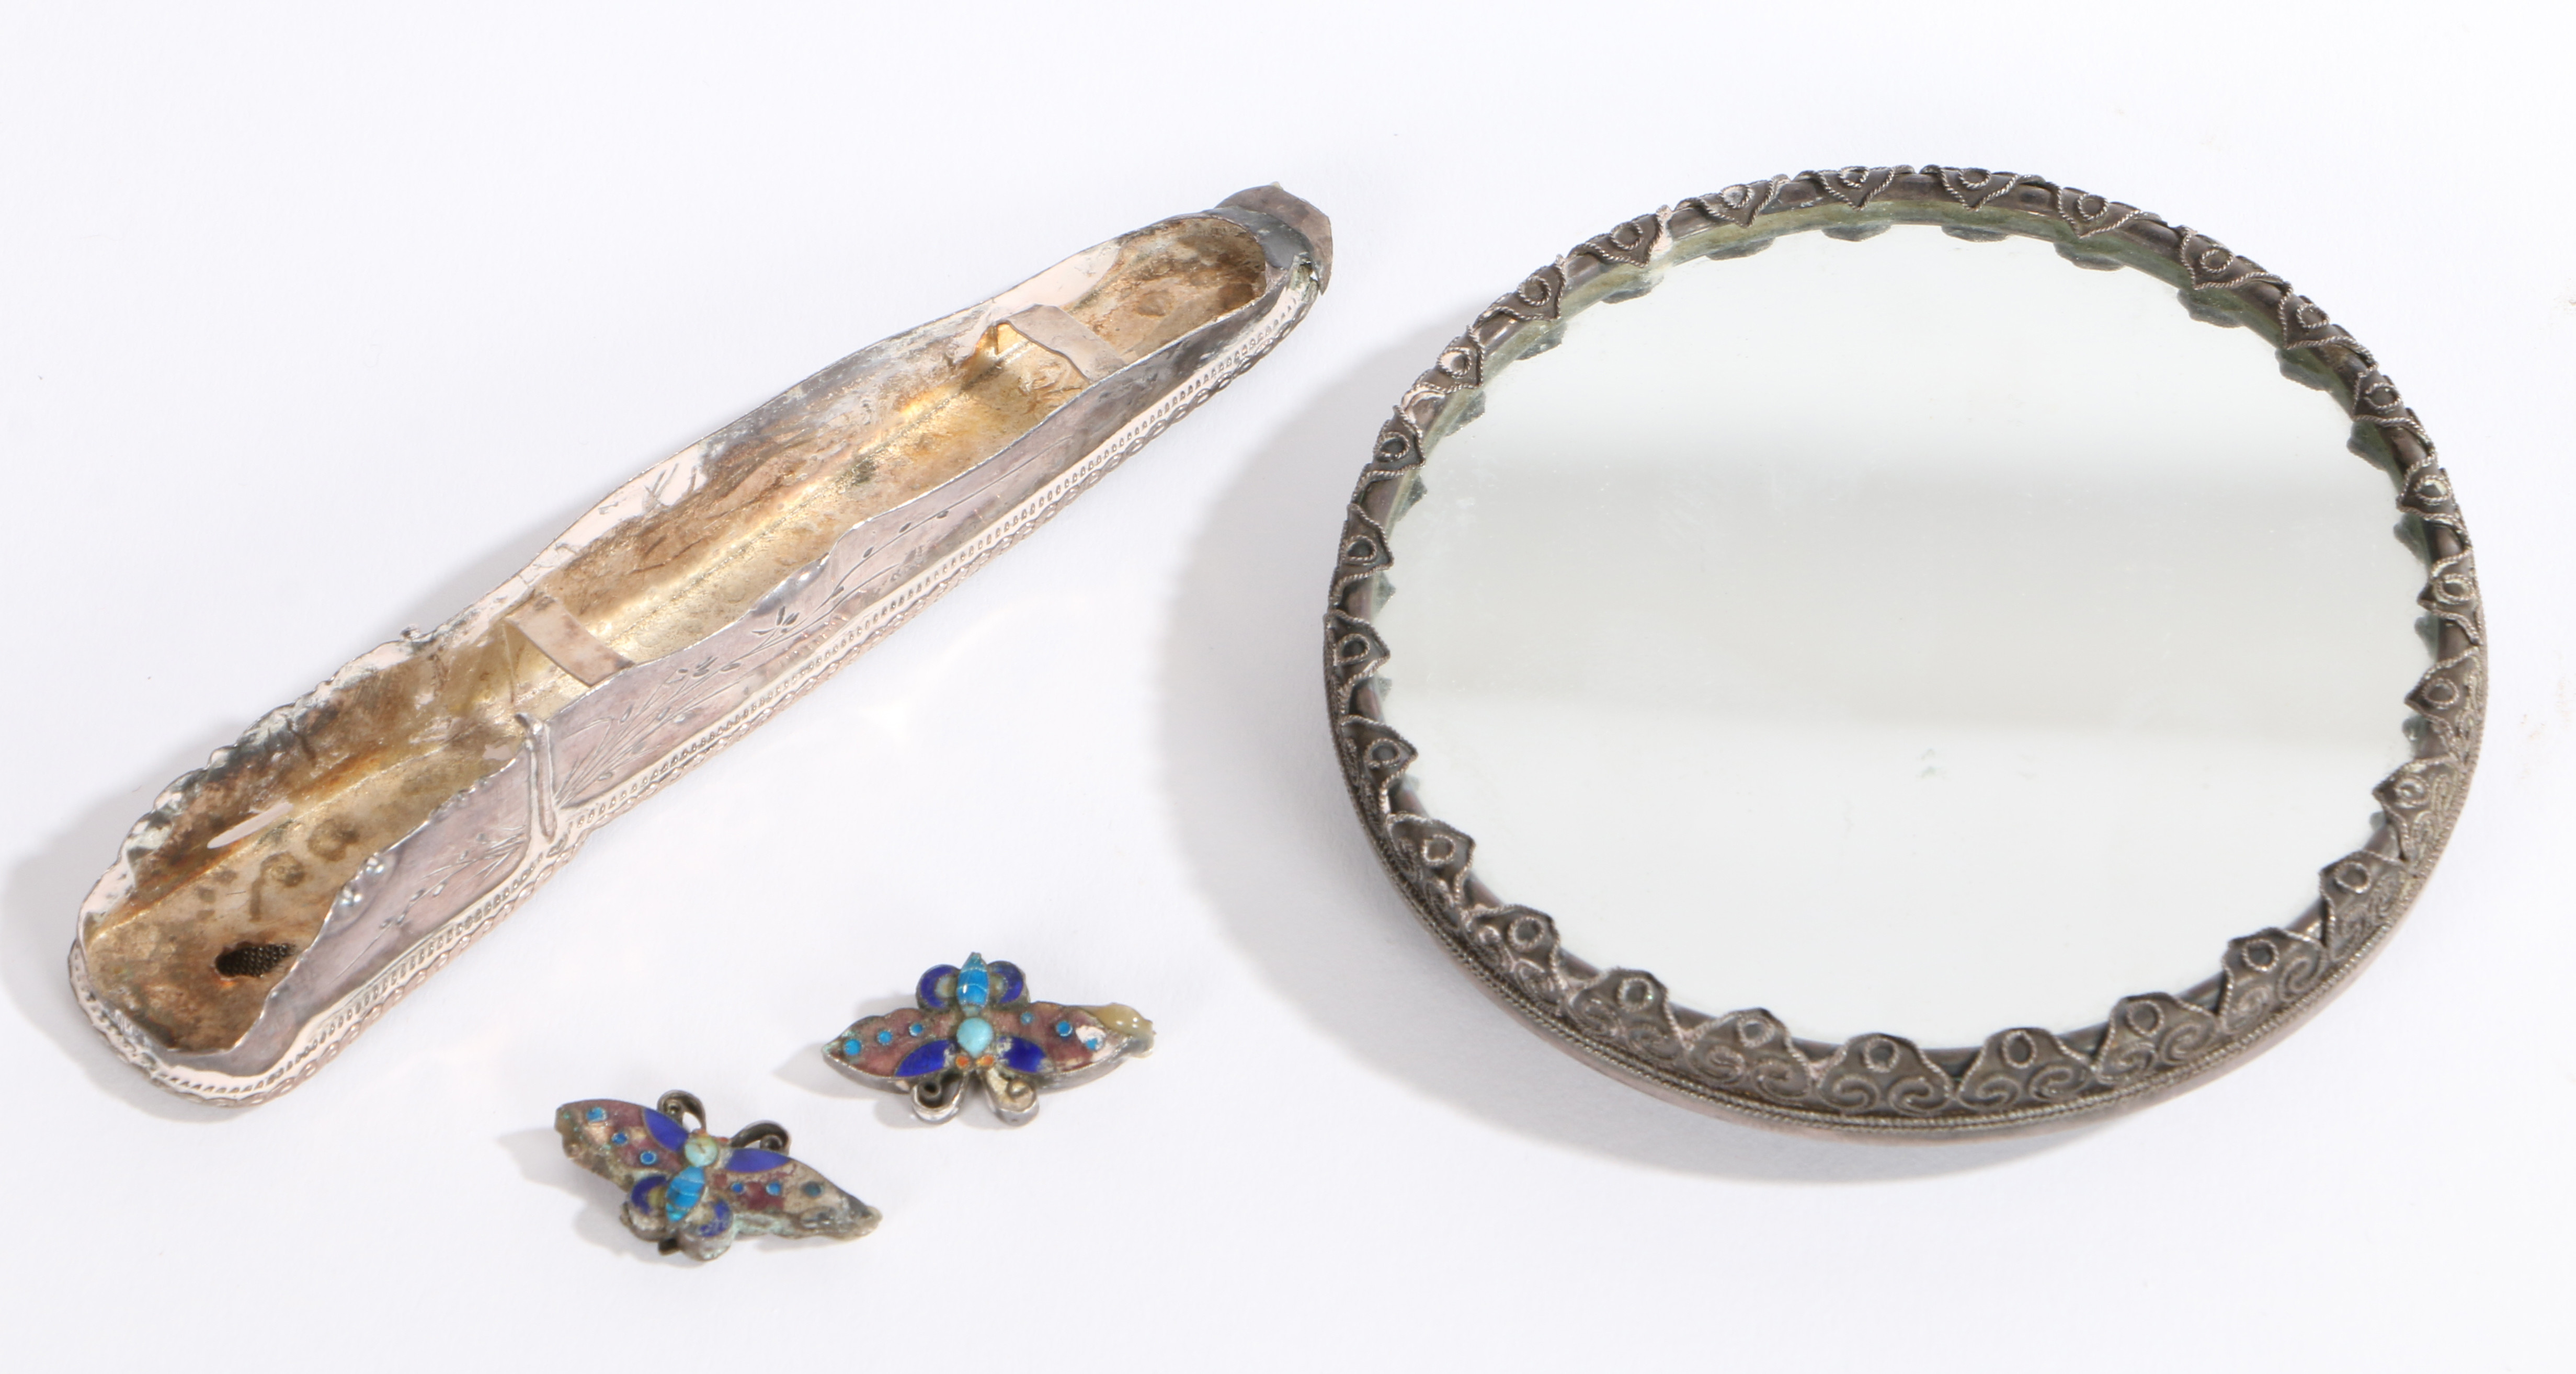 A CHINESE JADE, ENAMEL AND TURQUOISE SET HAND MIRROR. - Image 2 of 2